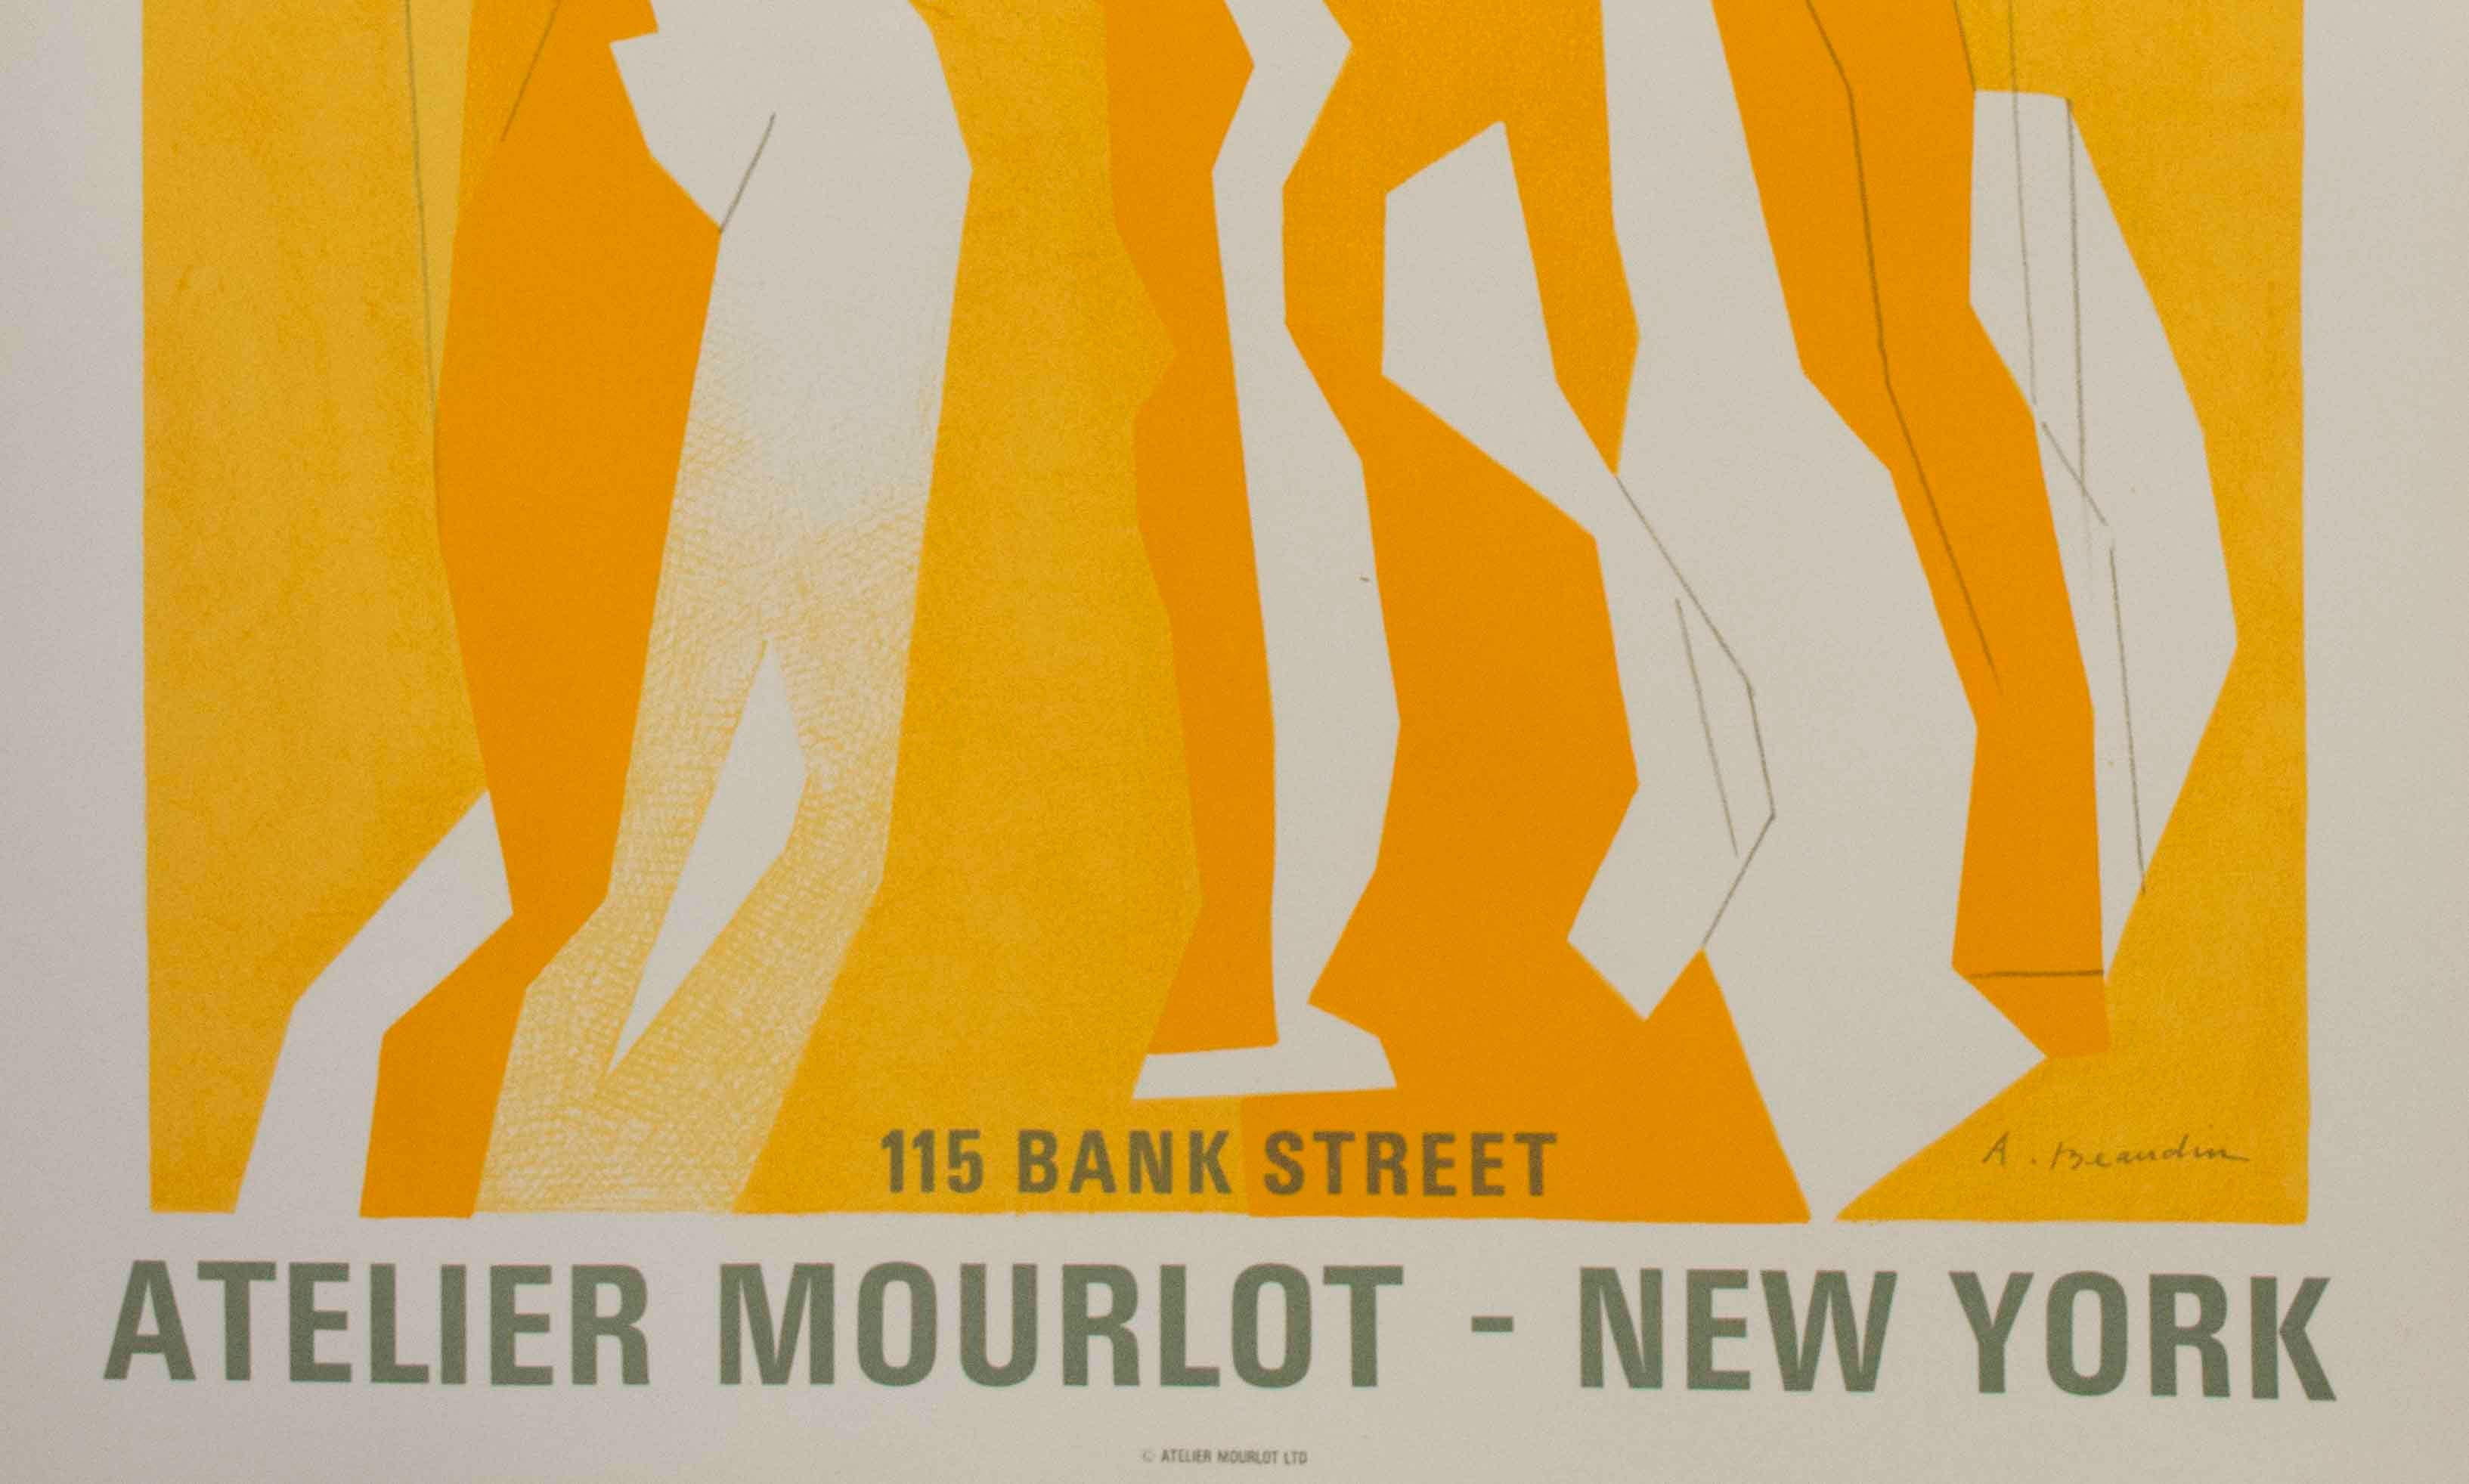 Lithographic poster for the opening of the New York Atelier Mourlot branch in 1967, featuring a golden harmony of figures by Andre Beaudin.
